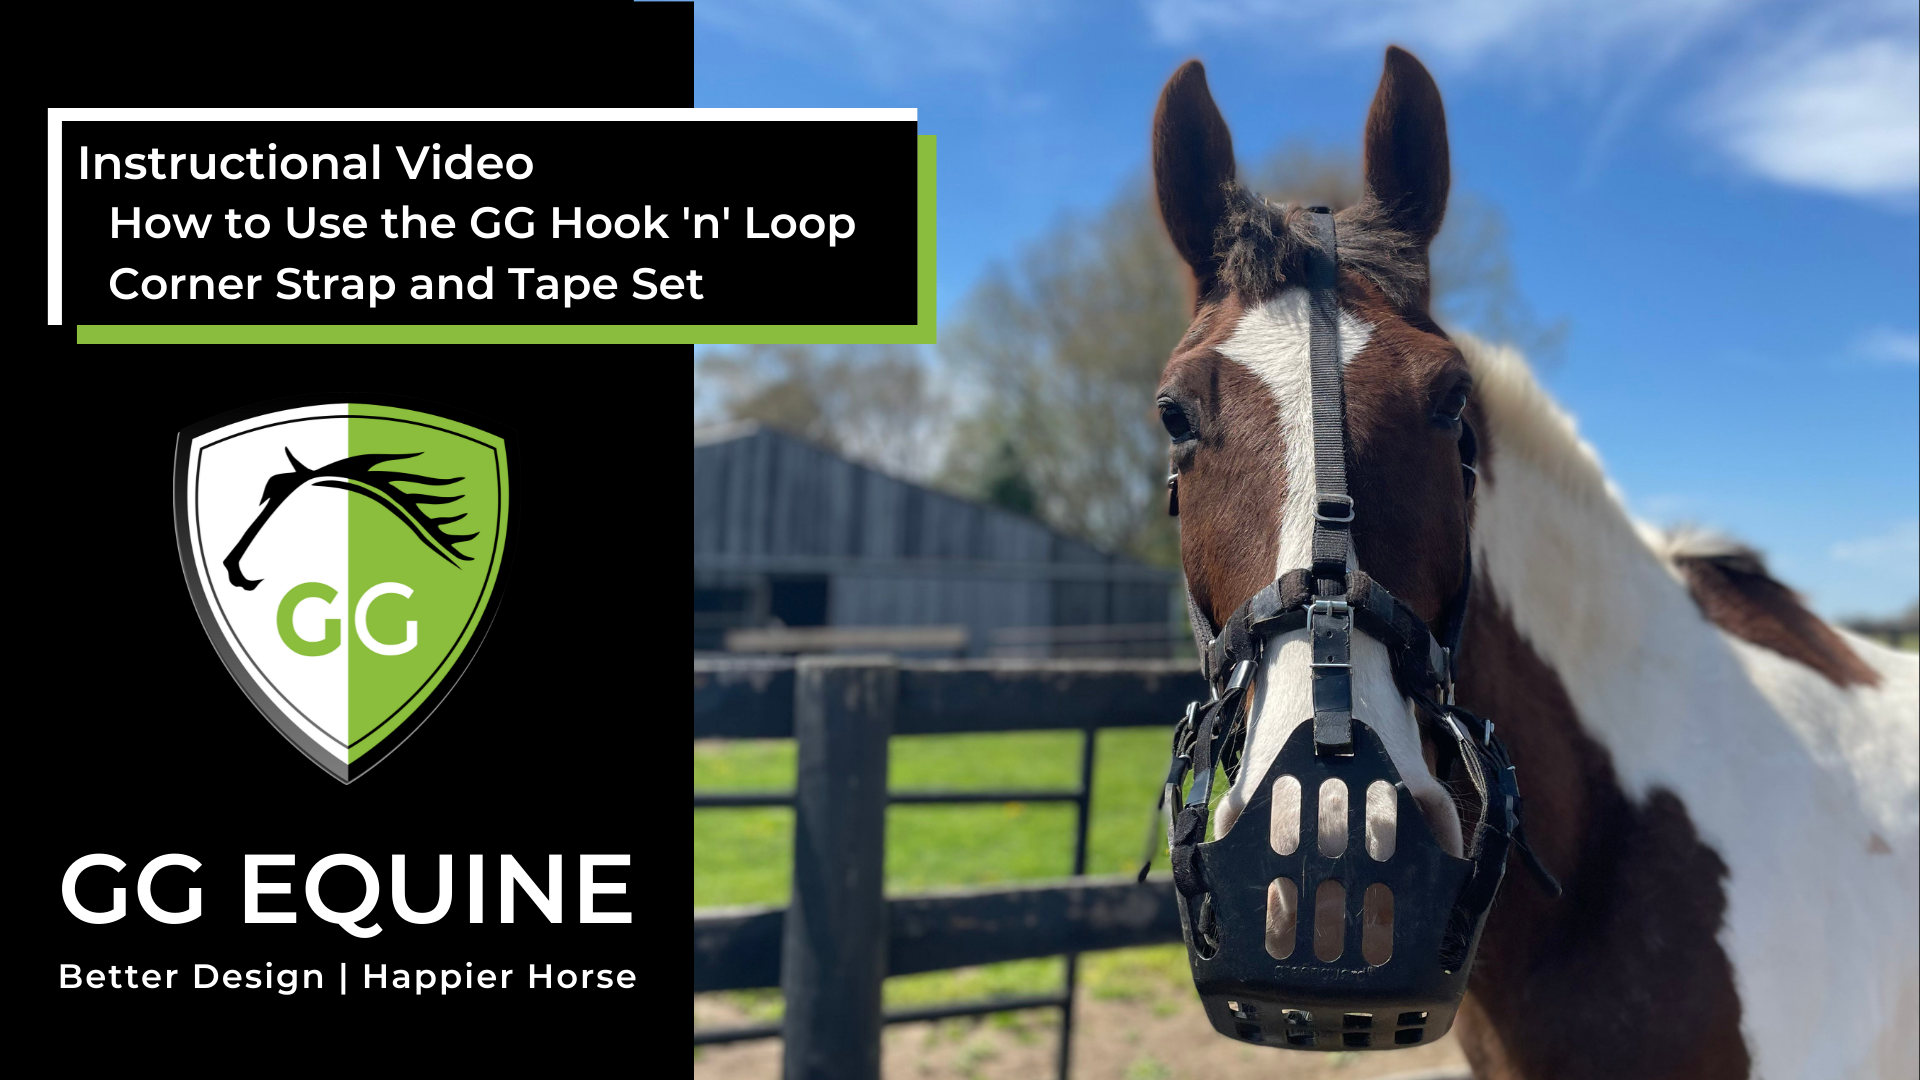 Cargar vídeo: The primary instruction and tutorial video on how to use the hook and loop (read: velcro) strap set from GG Equine.